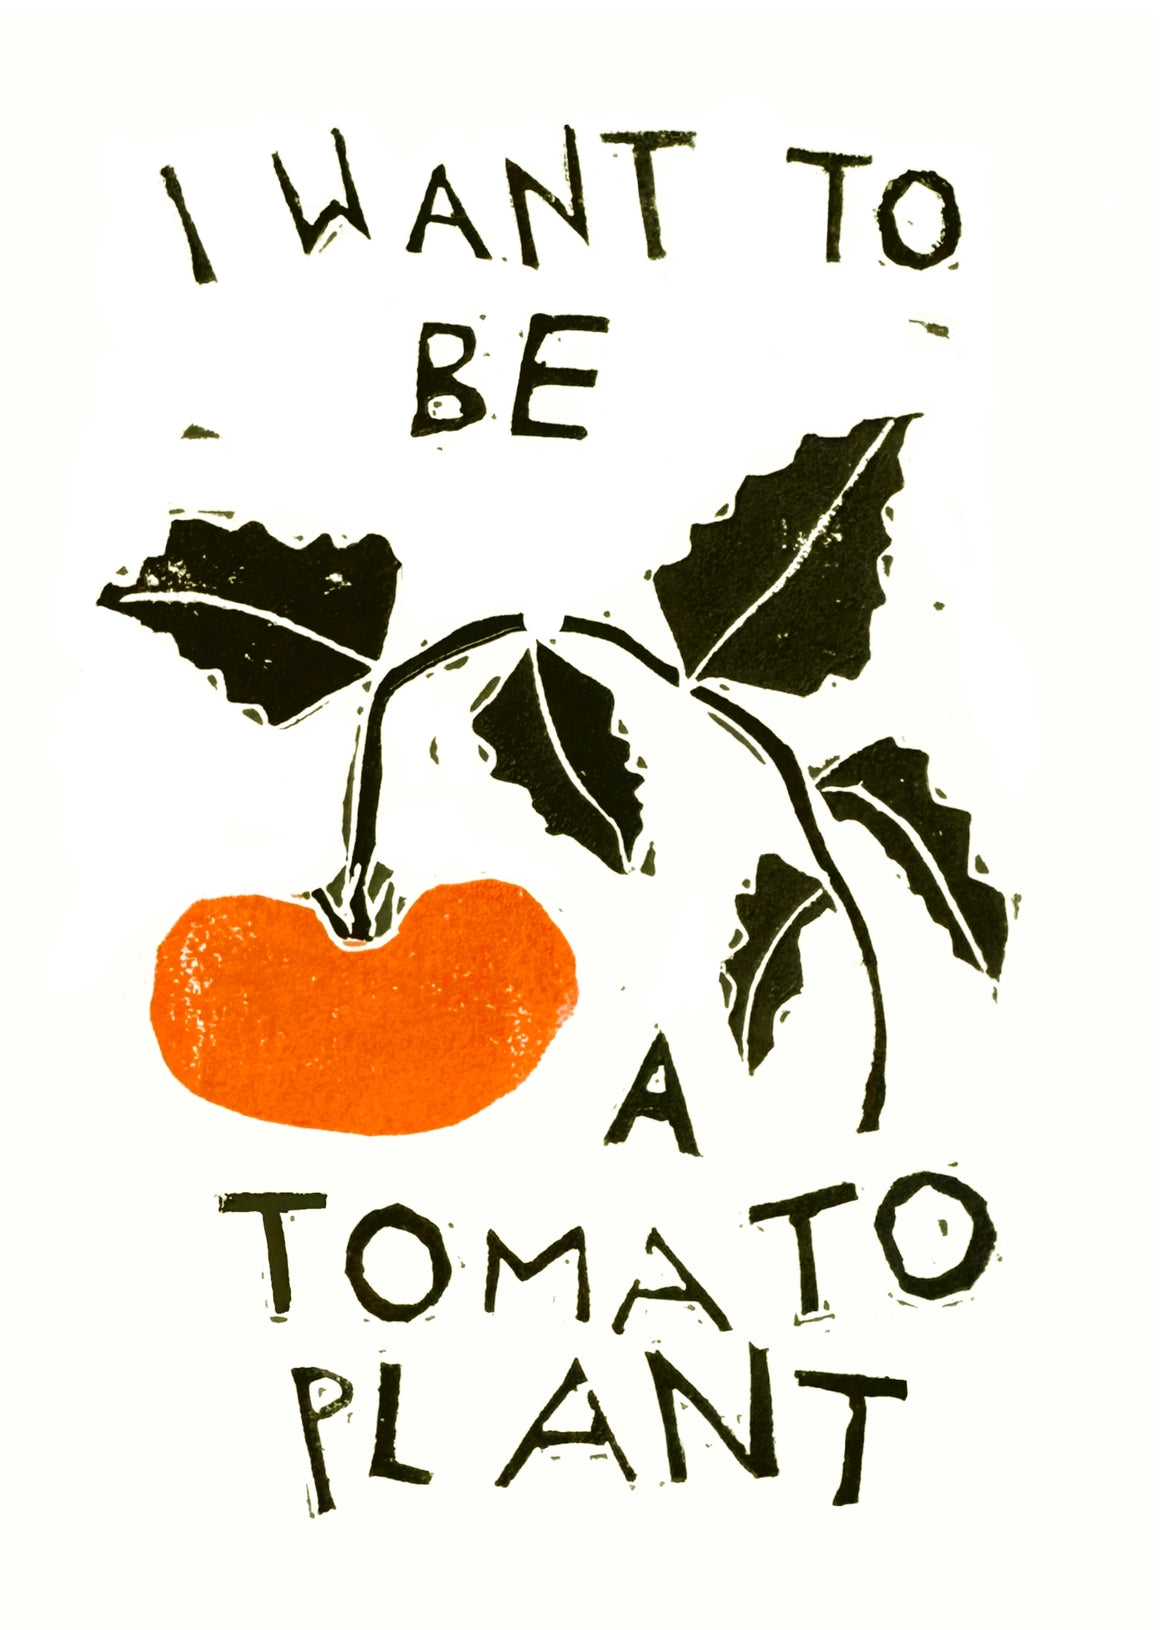 I Want To Be A Tomato Plant Art Print & Poem by Rani Ban Co.